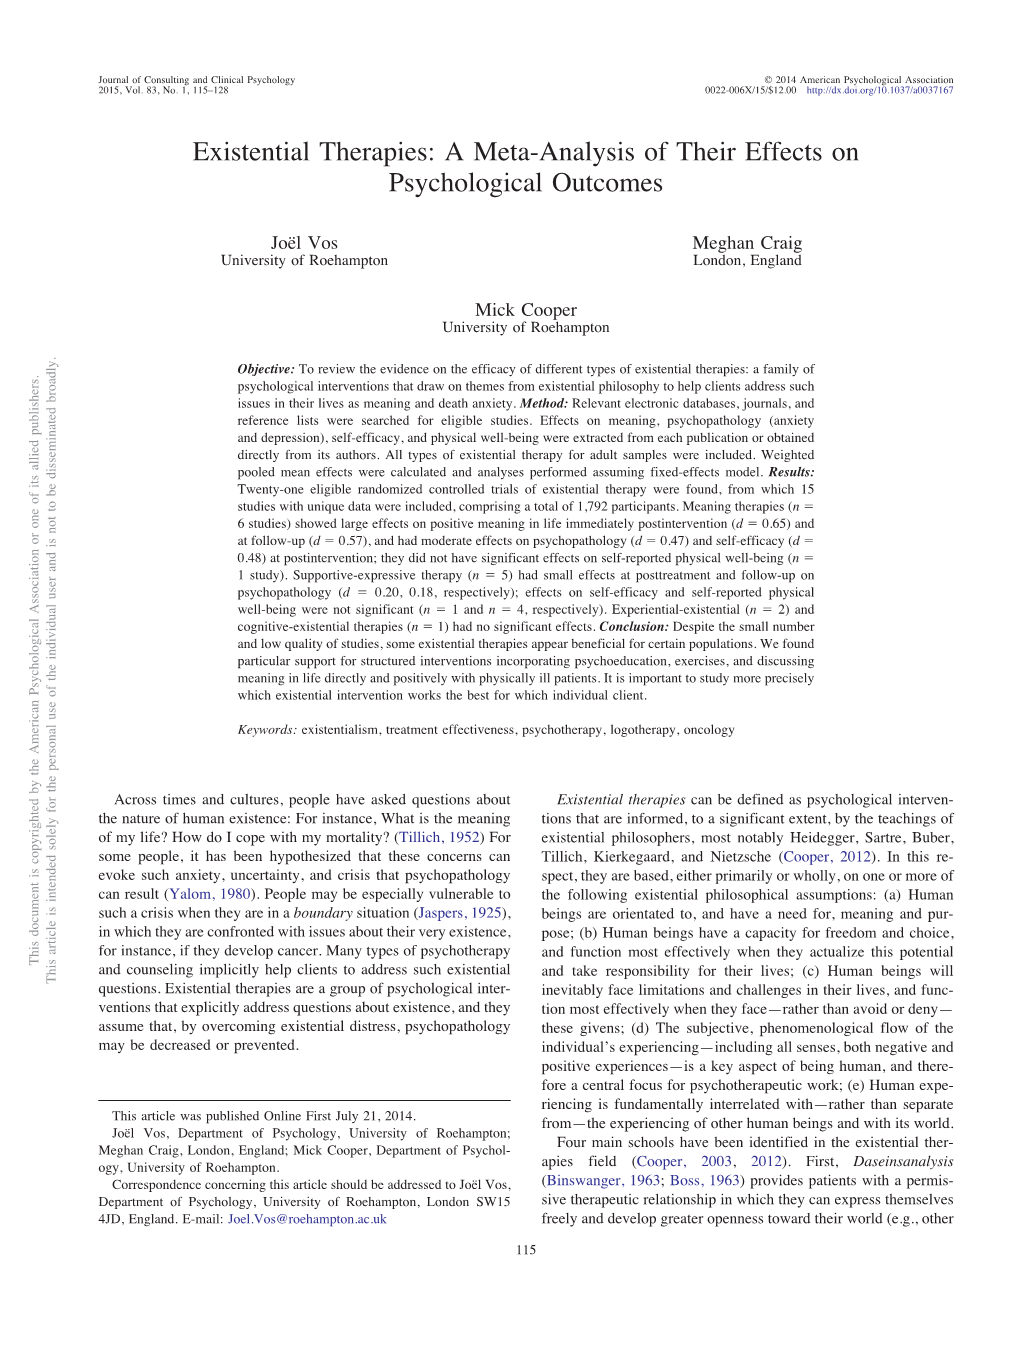 Existential Therapies: a Meta-Analysis of Their Effects on Psychological Outcomes